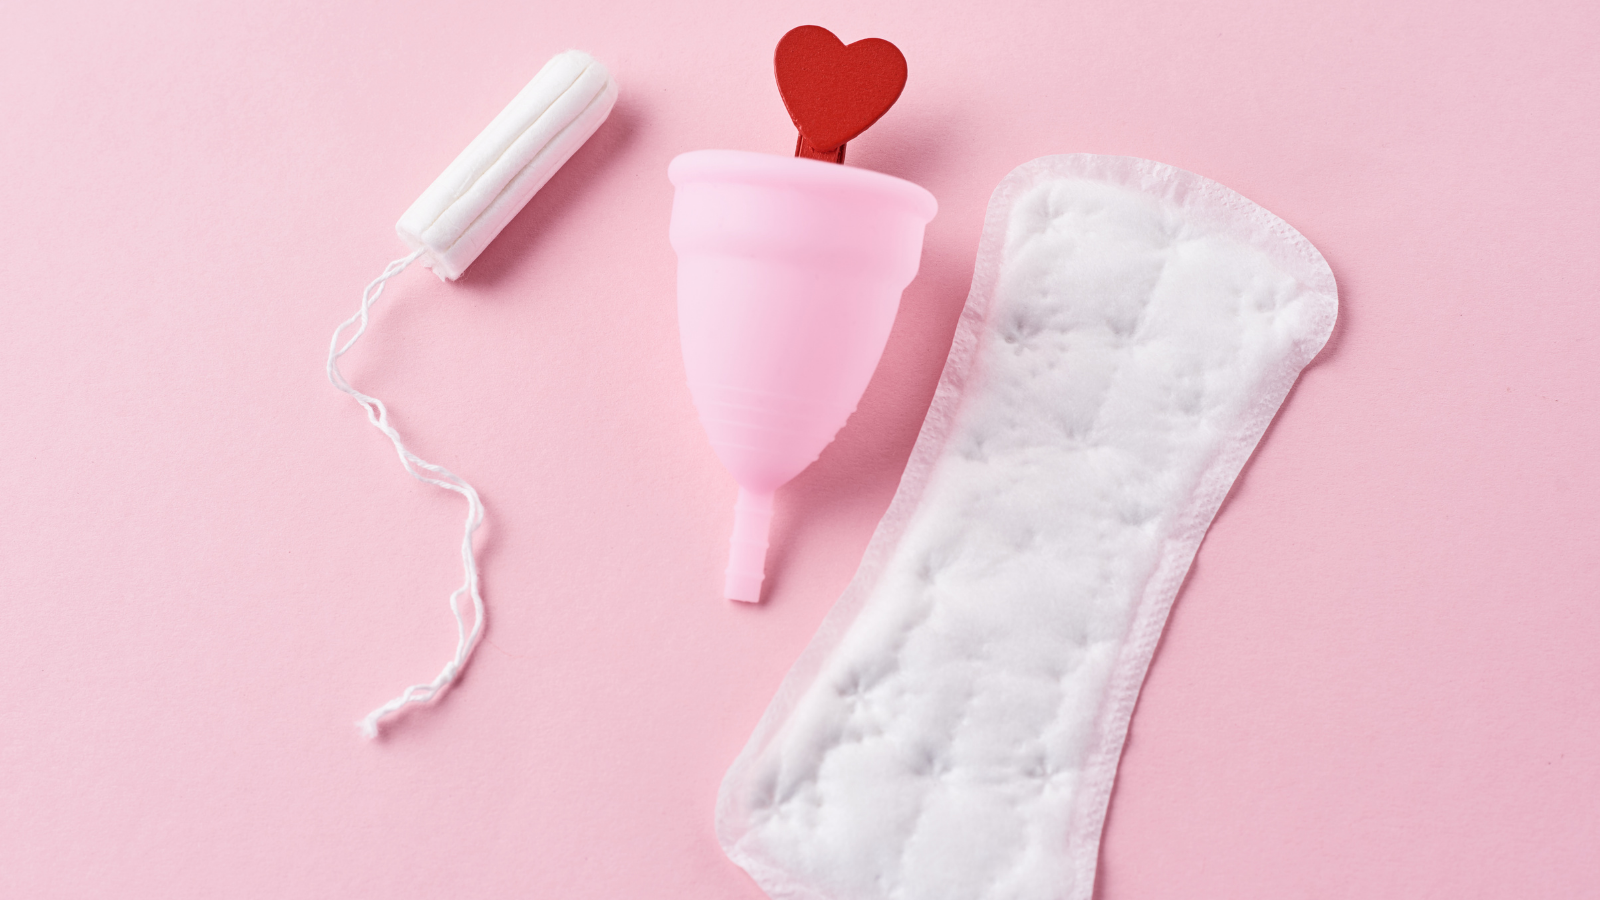 tampon, menstrual cup and pad on pink background